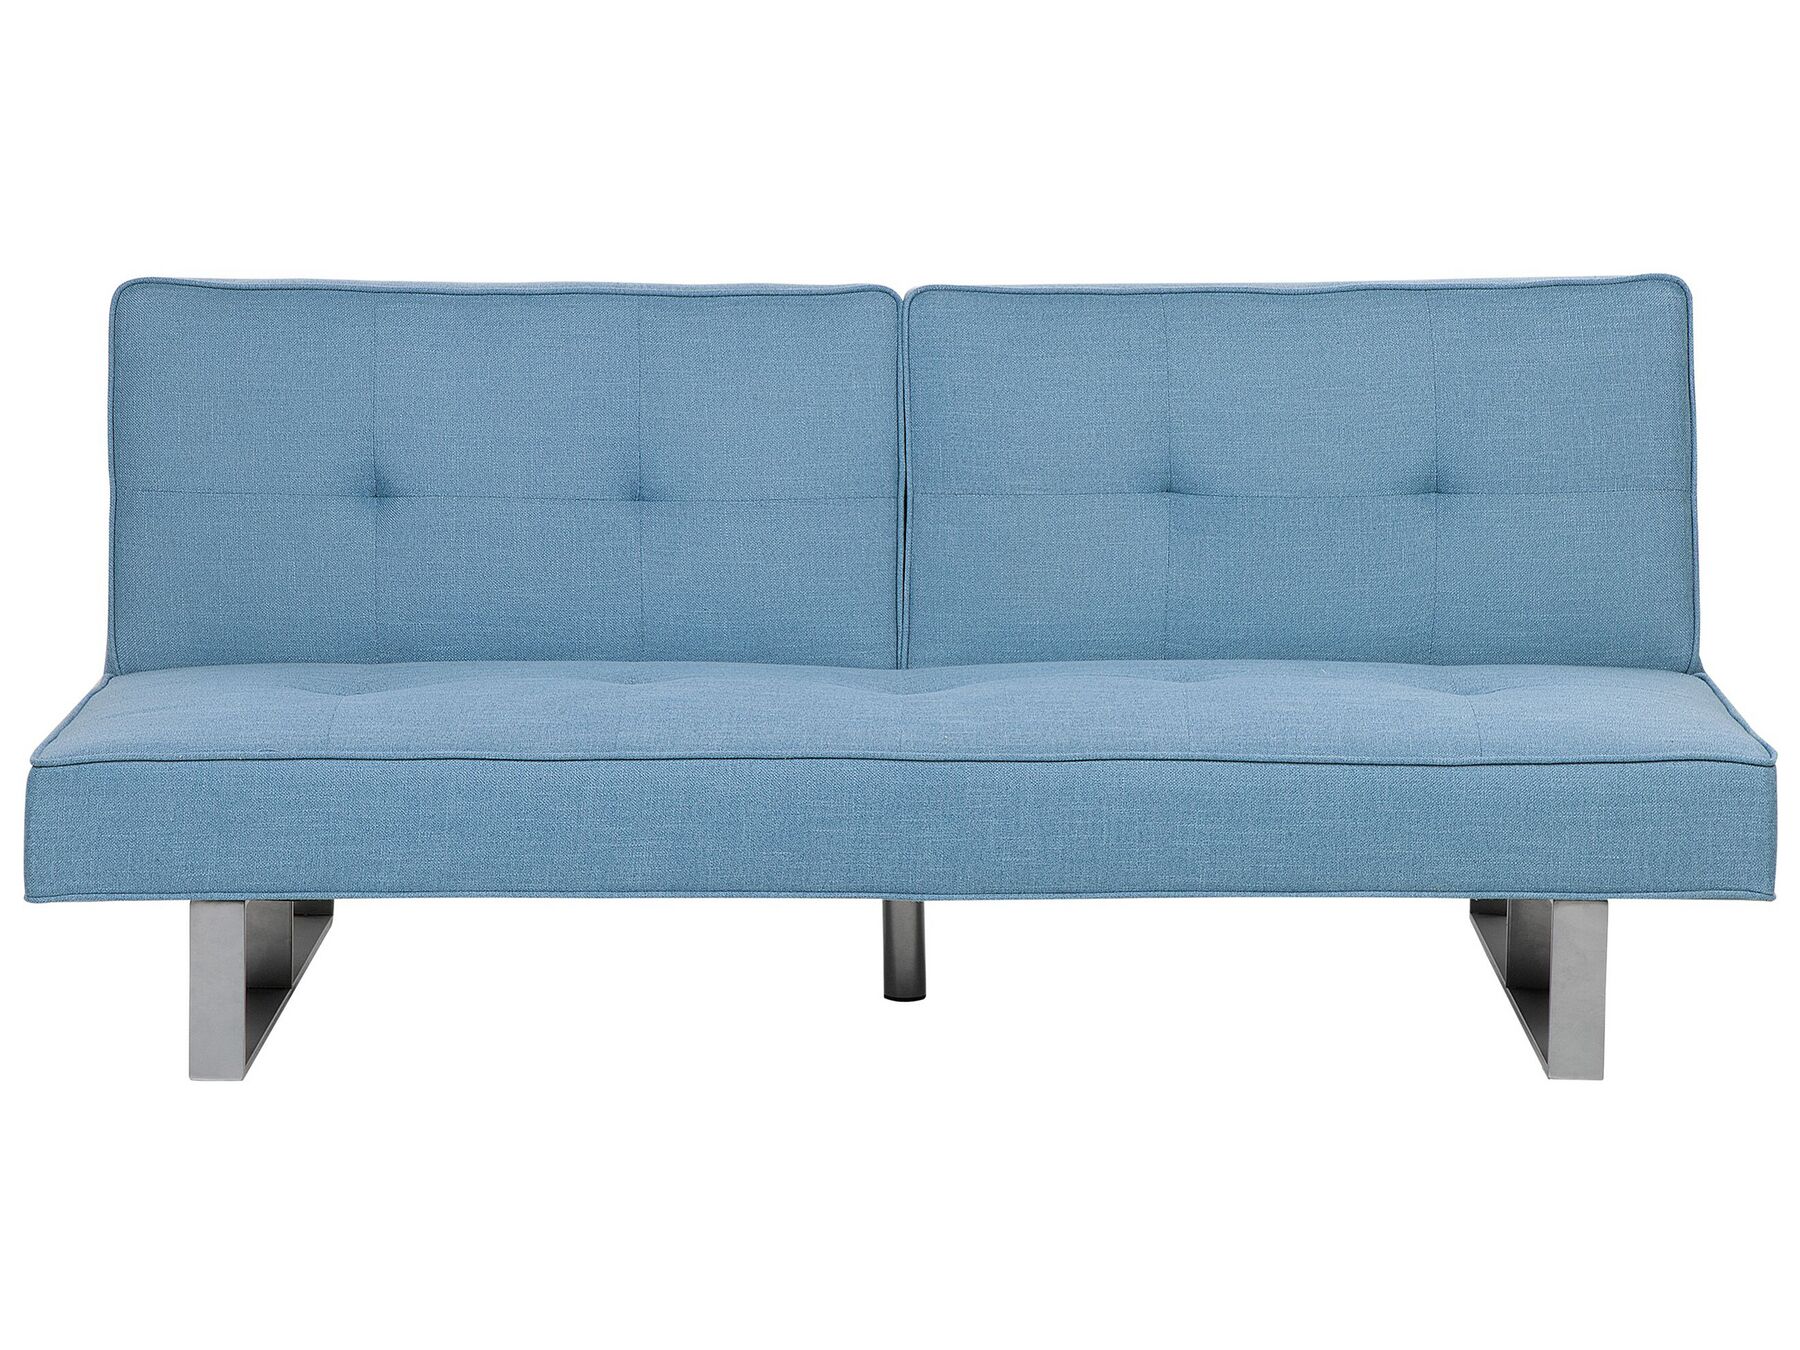 Trendy sofa bed in blue sleeping function upholstery cover Dublin-